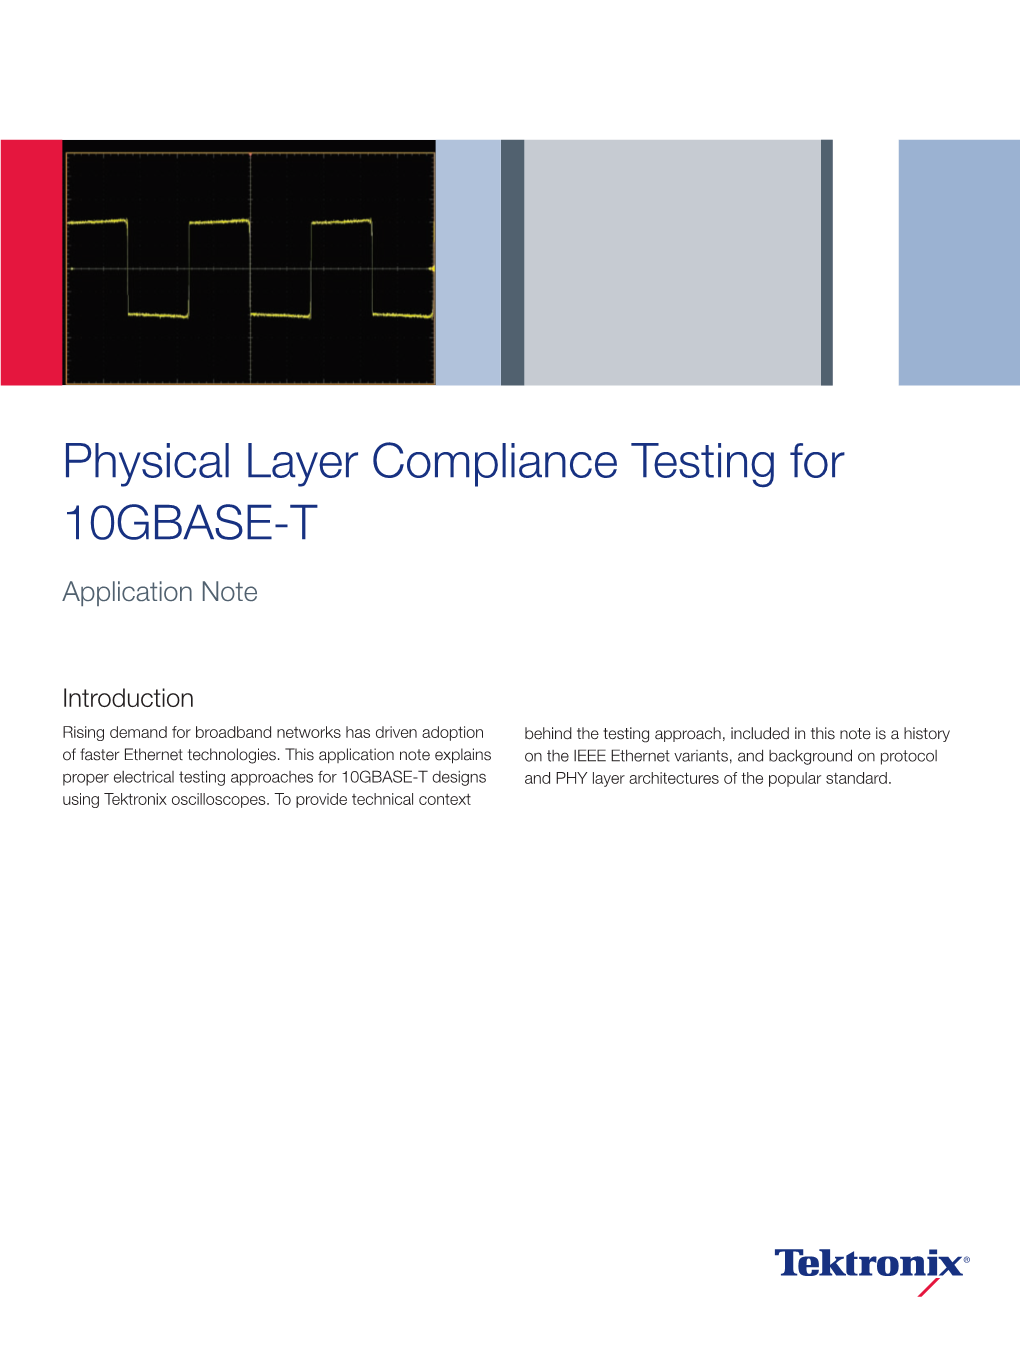 Physical Layer Compliance Testing for 10GBASE-T